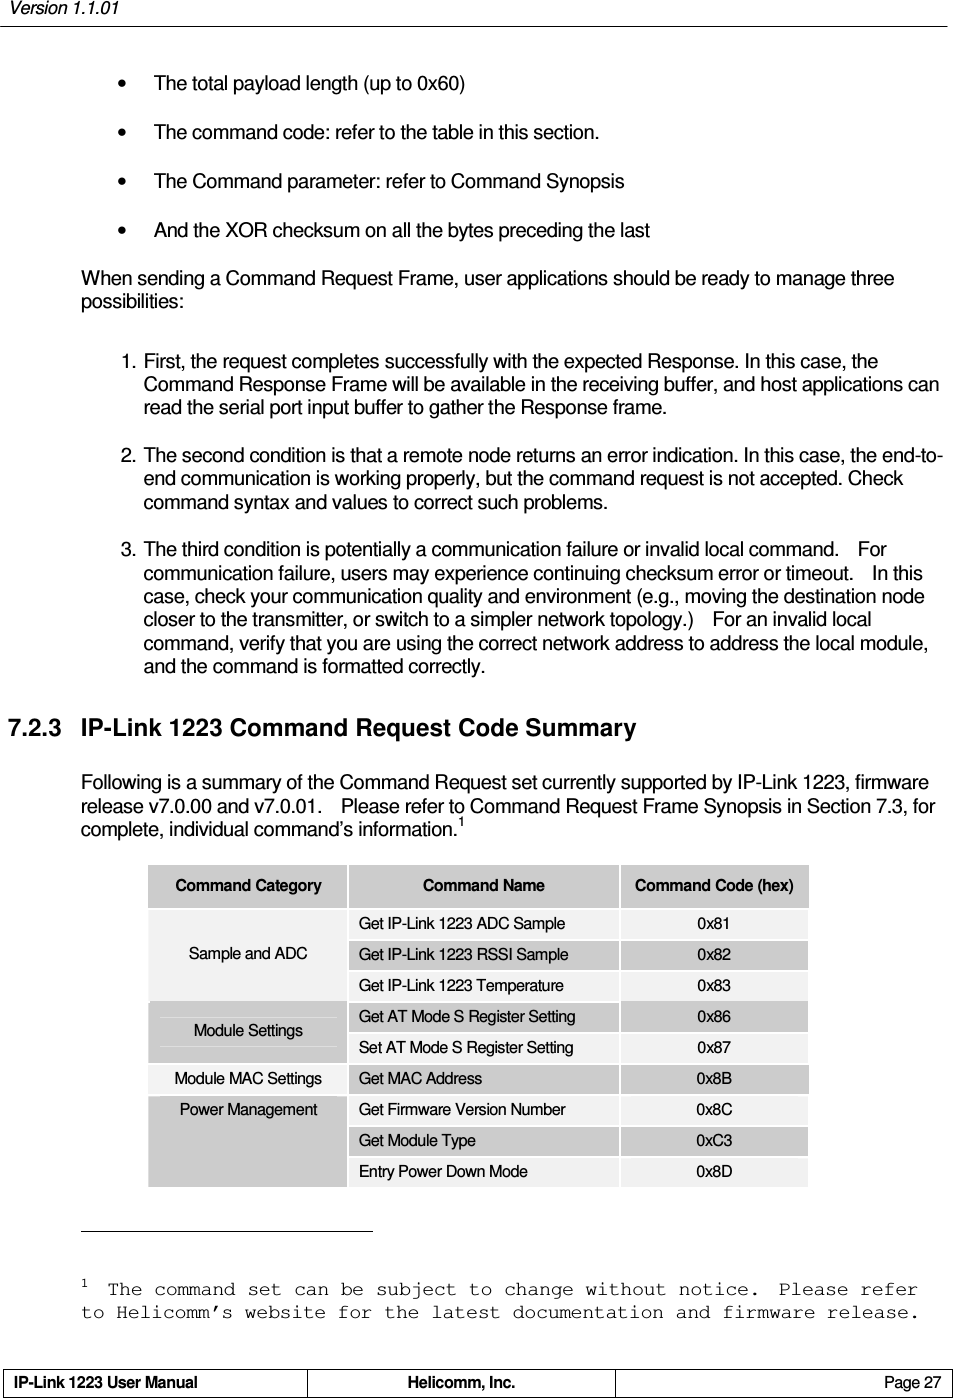 Version 1.1.01     IP-Link 1223 User Manual  Helicomm, Inc.  Page 27   •  The total payload length (up to 0x60) •  The command code: refer to the table in this section. •  The Command parameter: refer to Command Synopsis •  And the XOR checksum on all the bytes preceding the last When sending a Command Request Frame, user applications should be ready to manage three possibilities: 1. First, the request completes successfully with the expected Response. In this case, the Command Response Frame will be available in the receiving buffer, and host applications can read the serial port input buffer to gather the Response frame. 2. The second condition is that a remote node returns an error indication. In this case, the end-to-end communication is working properly, but the command request is not accepted. Check command syntax and values to correct such problems. 3. The third condition is potentially a communication failure or invalid local command.    For communication failure, users may experience continuing checksum error or timeout.    In this case, check your communication quality and environment (e.g., moving the destination node closer to the transmitter, or switch to a simpler network topology.)    For an invalid local command, verify that you are using the correct network address to address the local module, and the command is formatted correctly. 7.2.3  IP-Link 1223 Command Request Code Summary Following is a summary of the Command Request set currently supported by IP-Link 1223, firmware release v7.0.00 and v7.0.01.    Please refer to Command Request Frame Synopsis in Section 7.3, for complete, individual command’s information.1 Command Category  Command Name  Command Code (hex) Get IP-Link 1223 ADC Sample  0x81 Get IP-Link 1223 RSSI Sample  0x82 Sample and ADC Get IP-Link 1223 Temperature  0x83 Get AT Mode S Register Setting  0x86 Module Settings Set AT Mode S Register Setting  0x87 Module MAC Settings  Get MAC Address  0x8B Get Firmware Version Number  0x8C Get Module Type  0xC3 Power Management Entry Power Down Mode  0x8D                                                       1  The command set can be subject to change without notice.  Please refer to Helicomm’s website for the latest documentation and firmware release. 